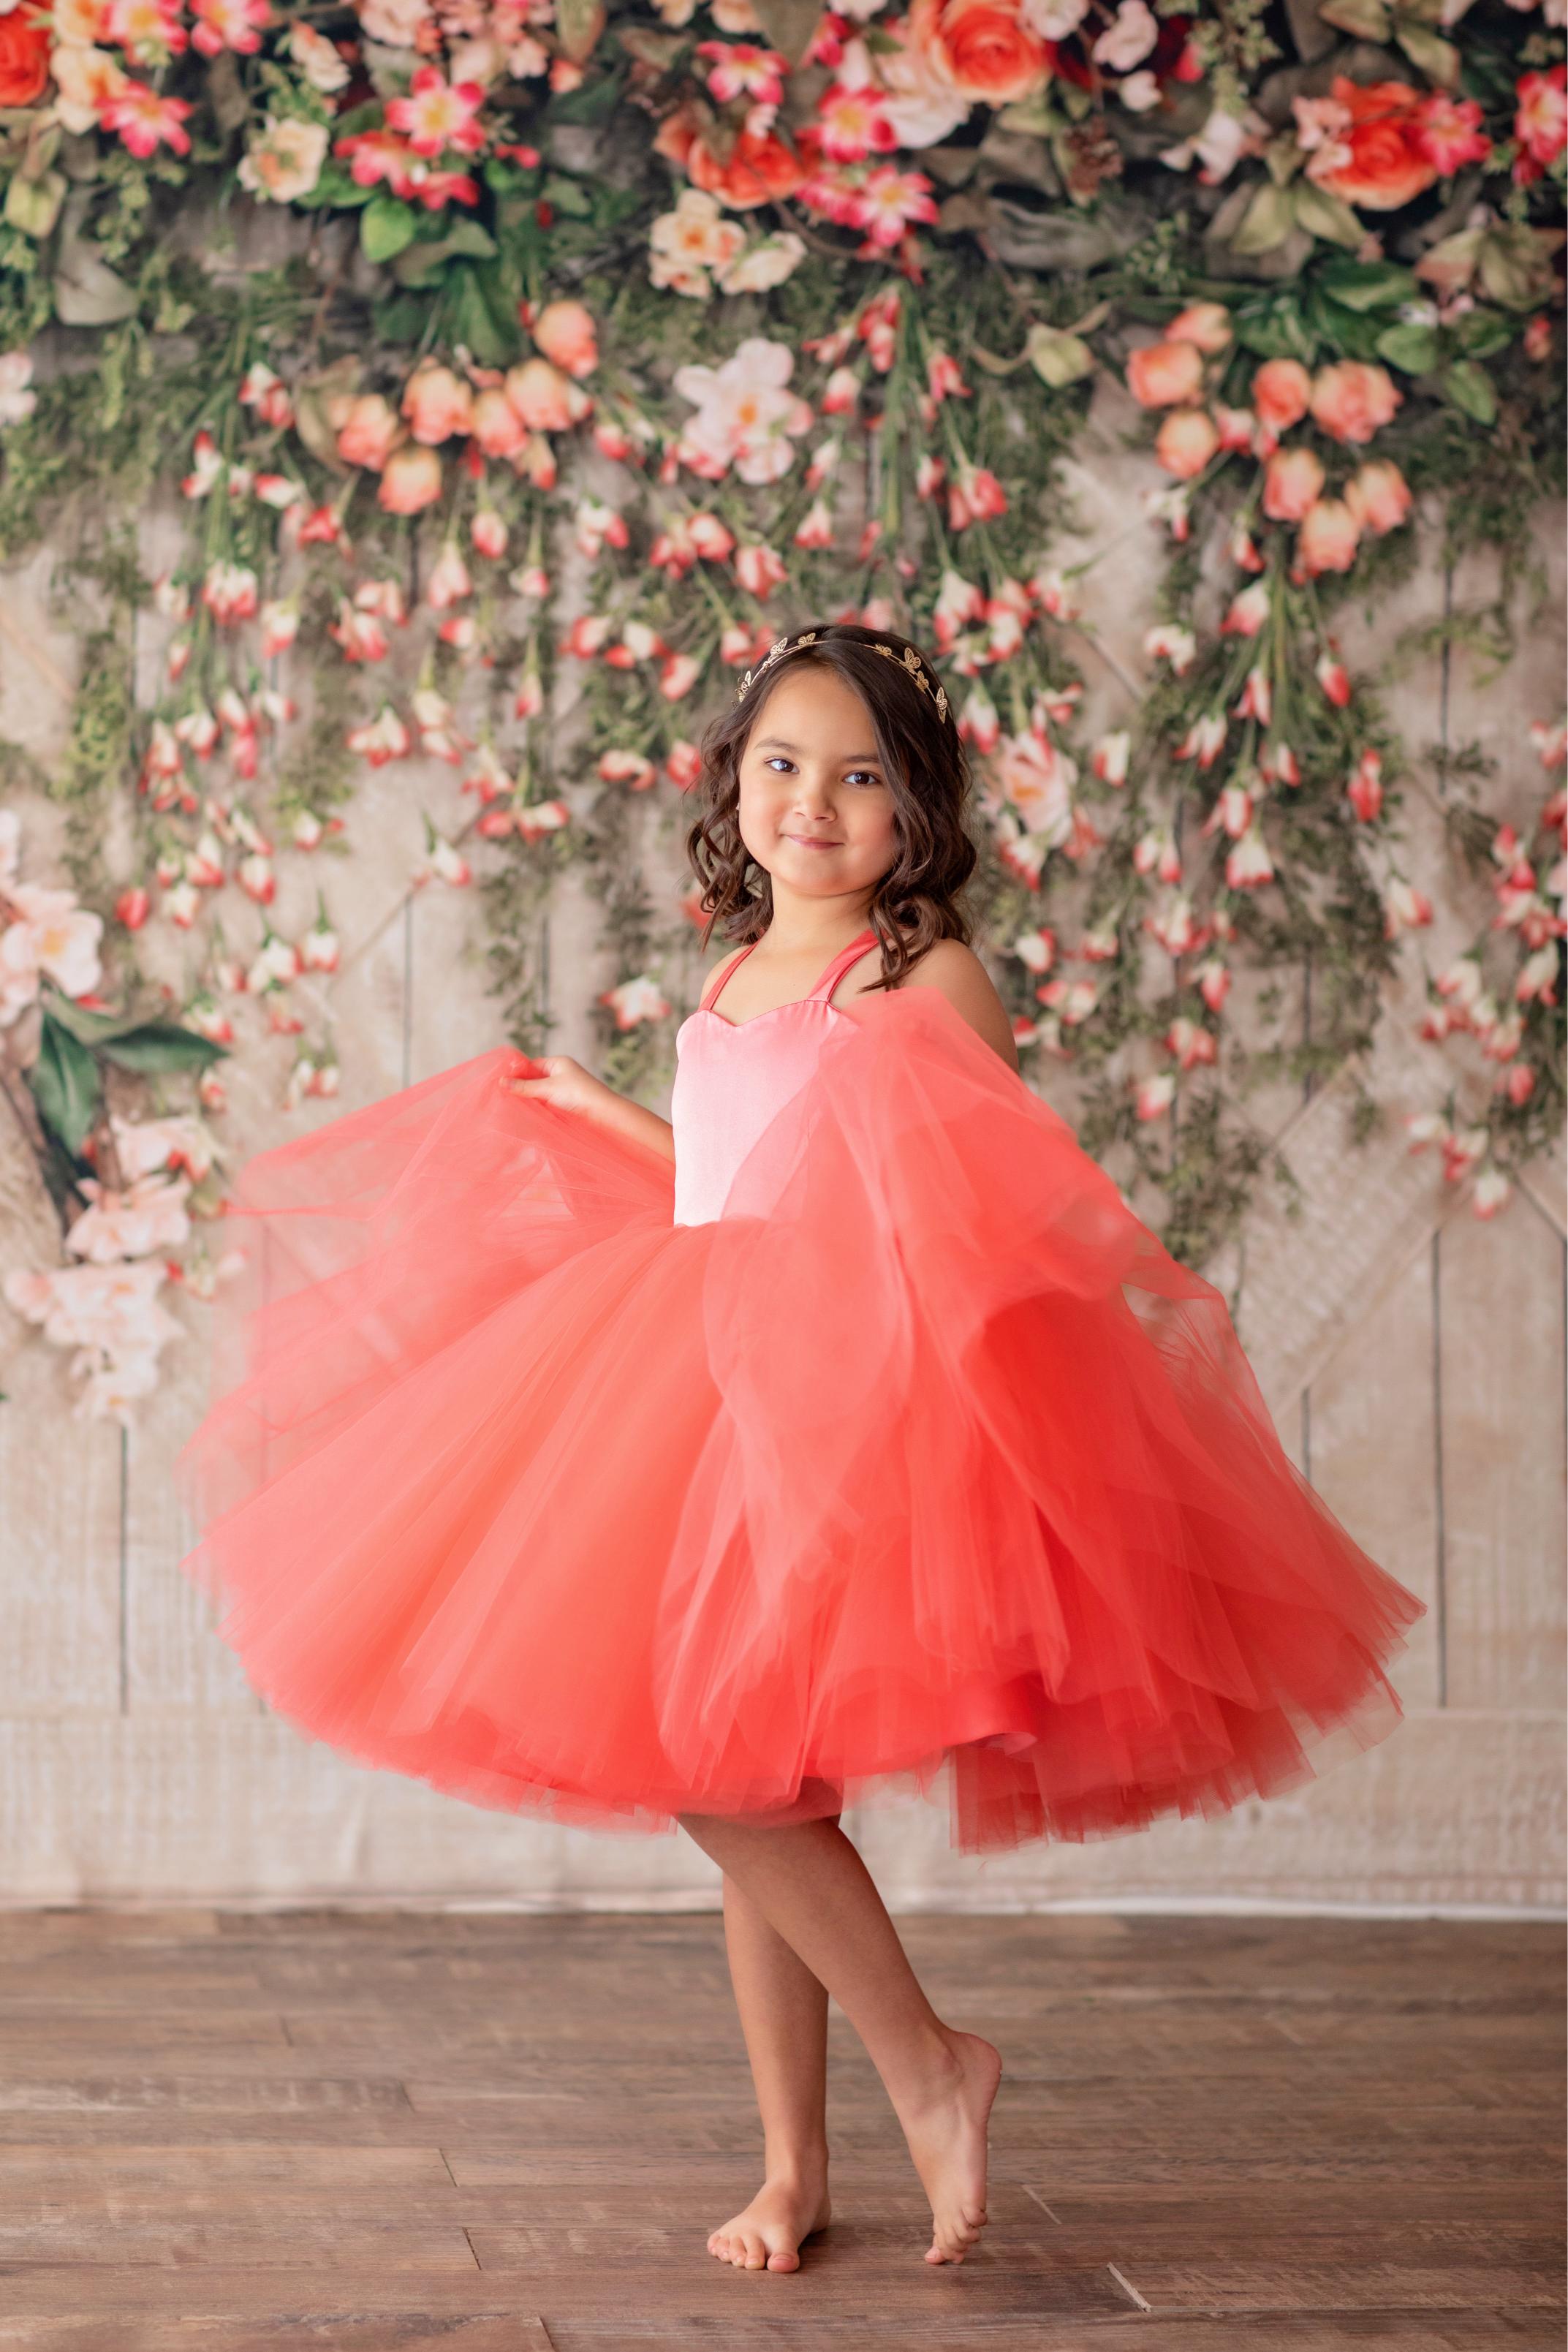 Simple Short Tulle Dress - Pick color option. Editorial Dress, Couture Gown, Special Occasion Dress